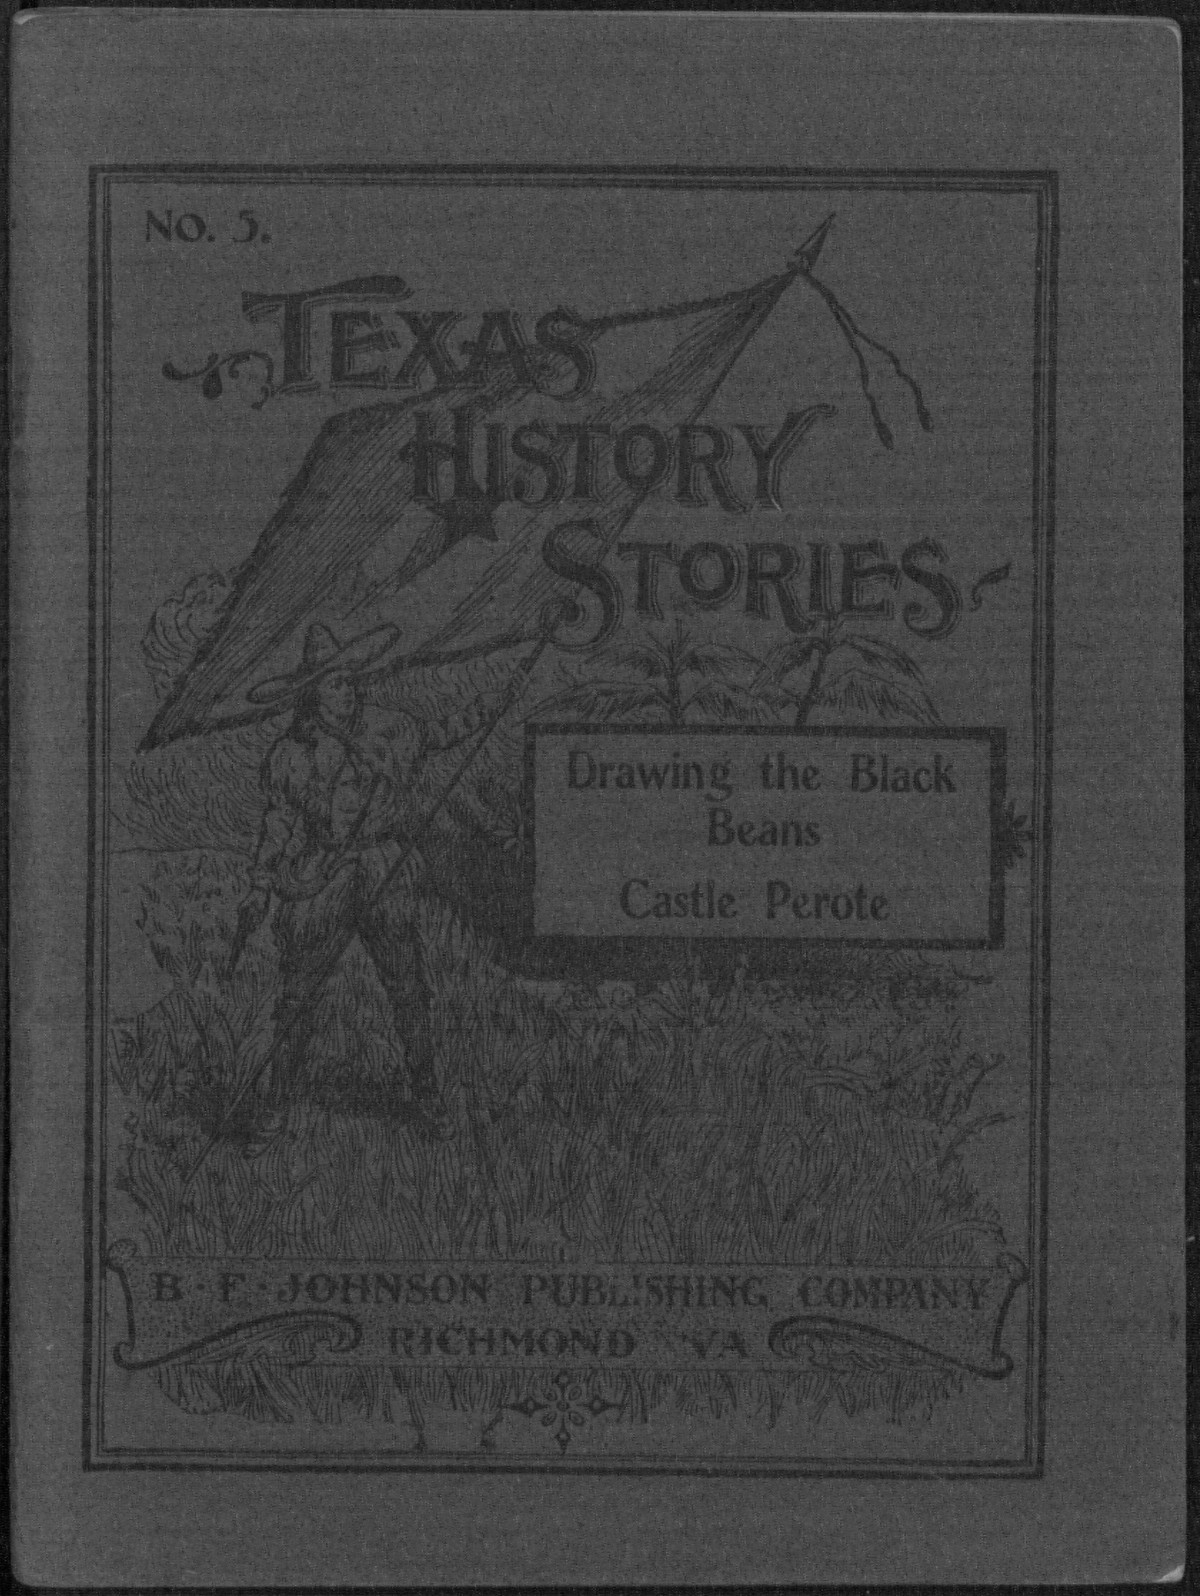 Texas History Stories: Drawing the Black Beans and Castle Peroté.
                                                
                                                    [Sequence #]: 1 of 49
                                                